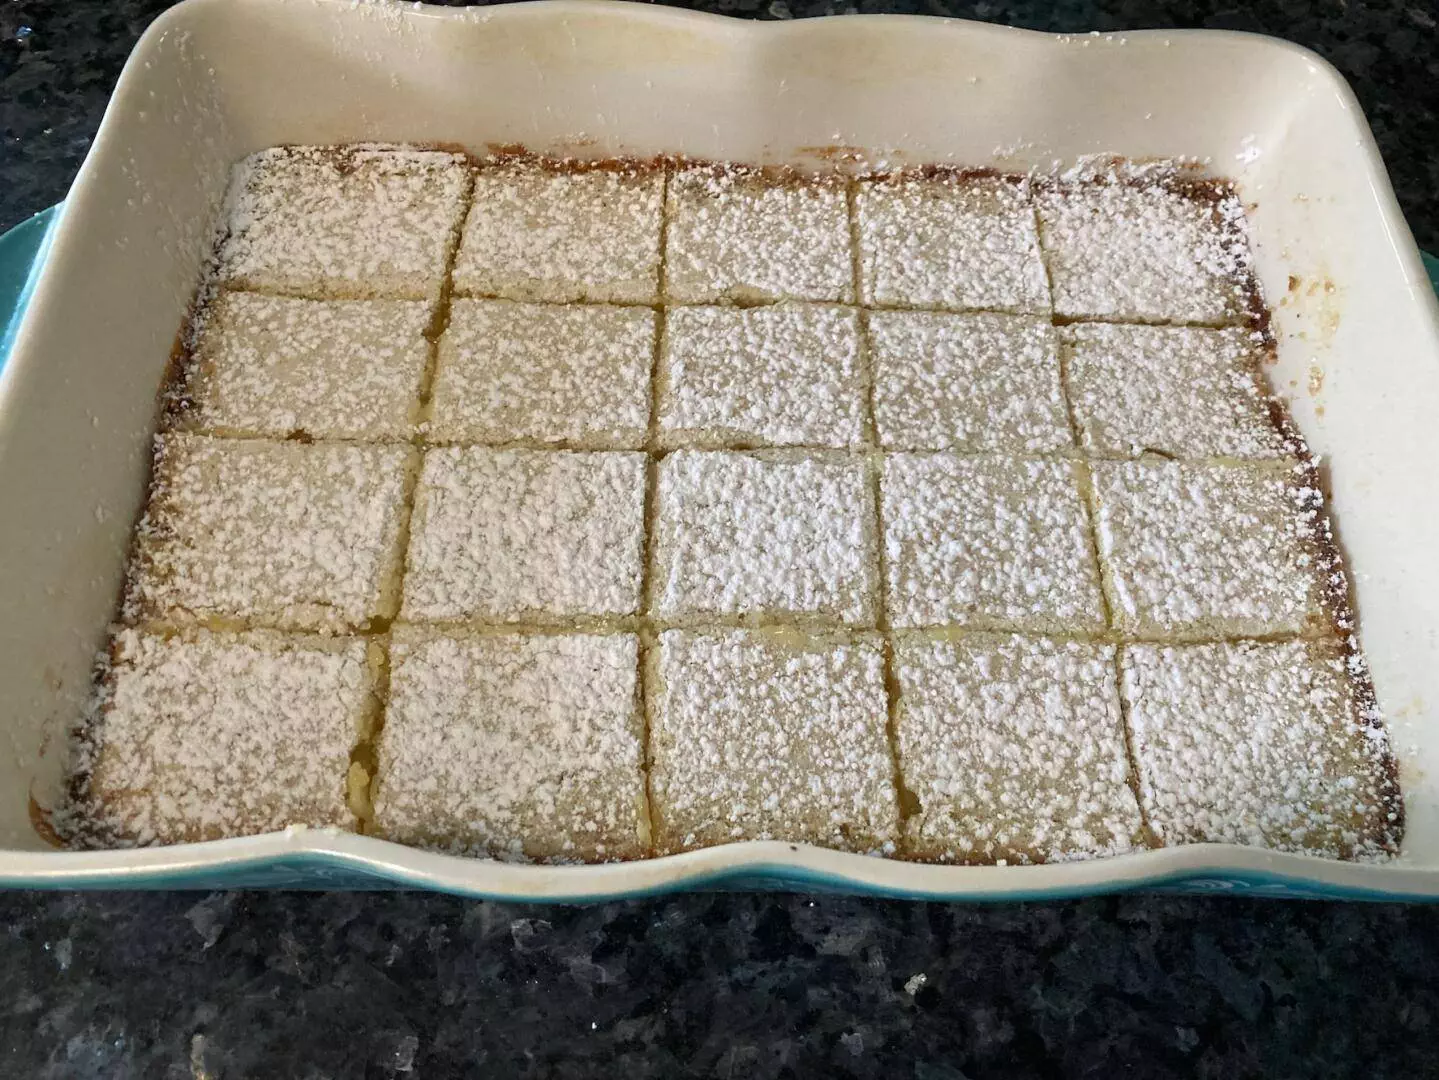 Luscious Lemon Bars from Out of the Box Baking.com